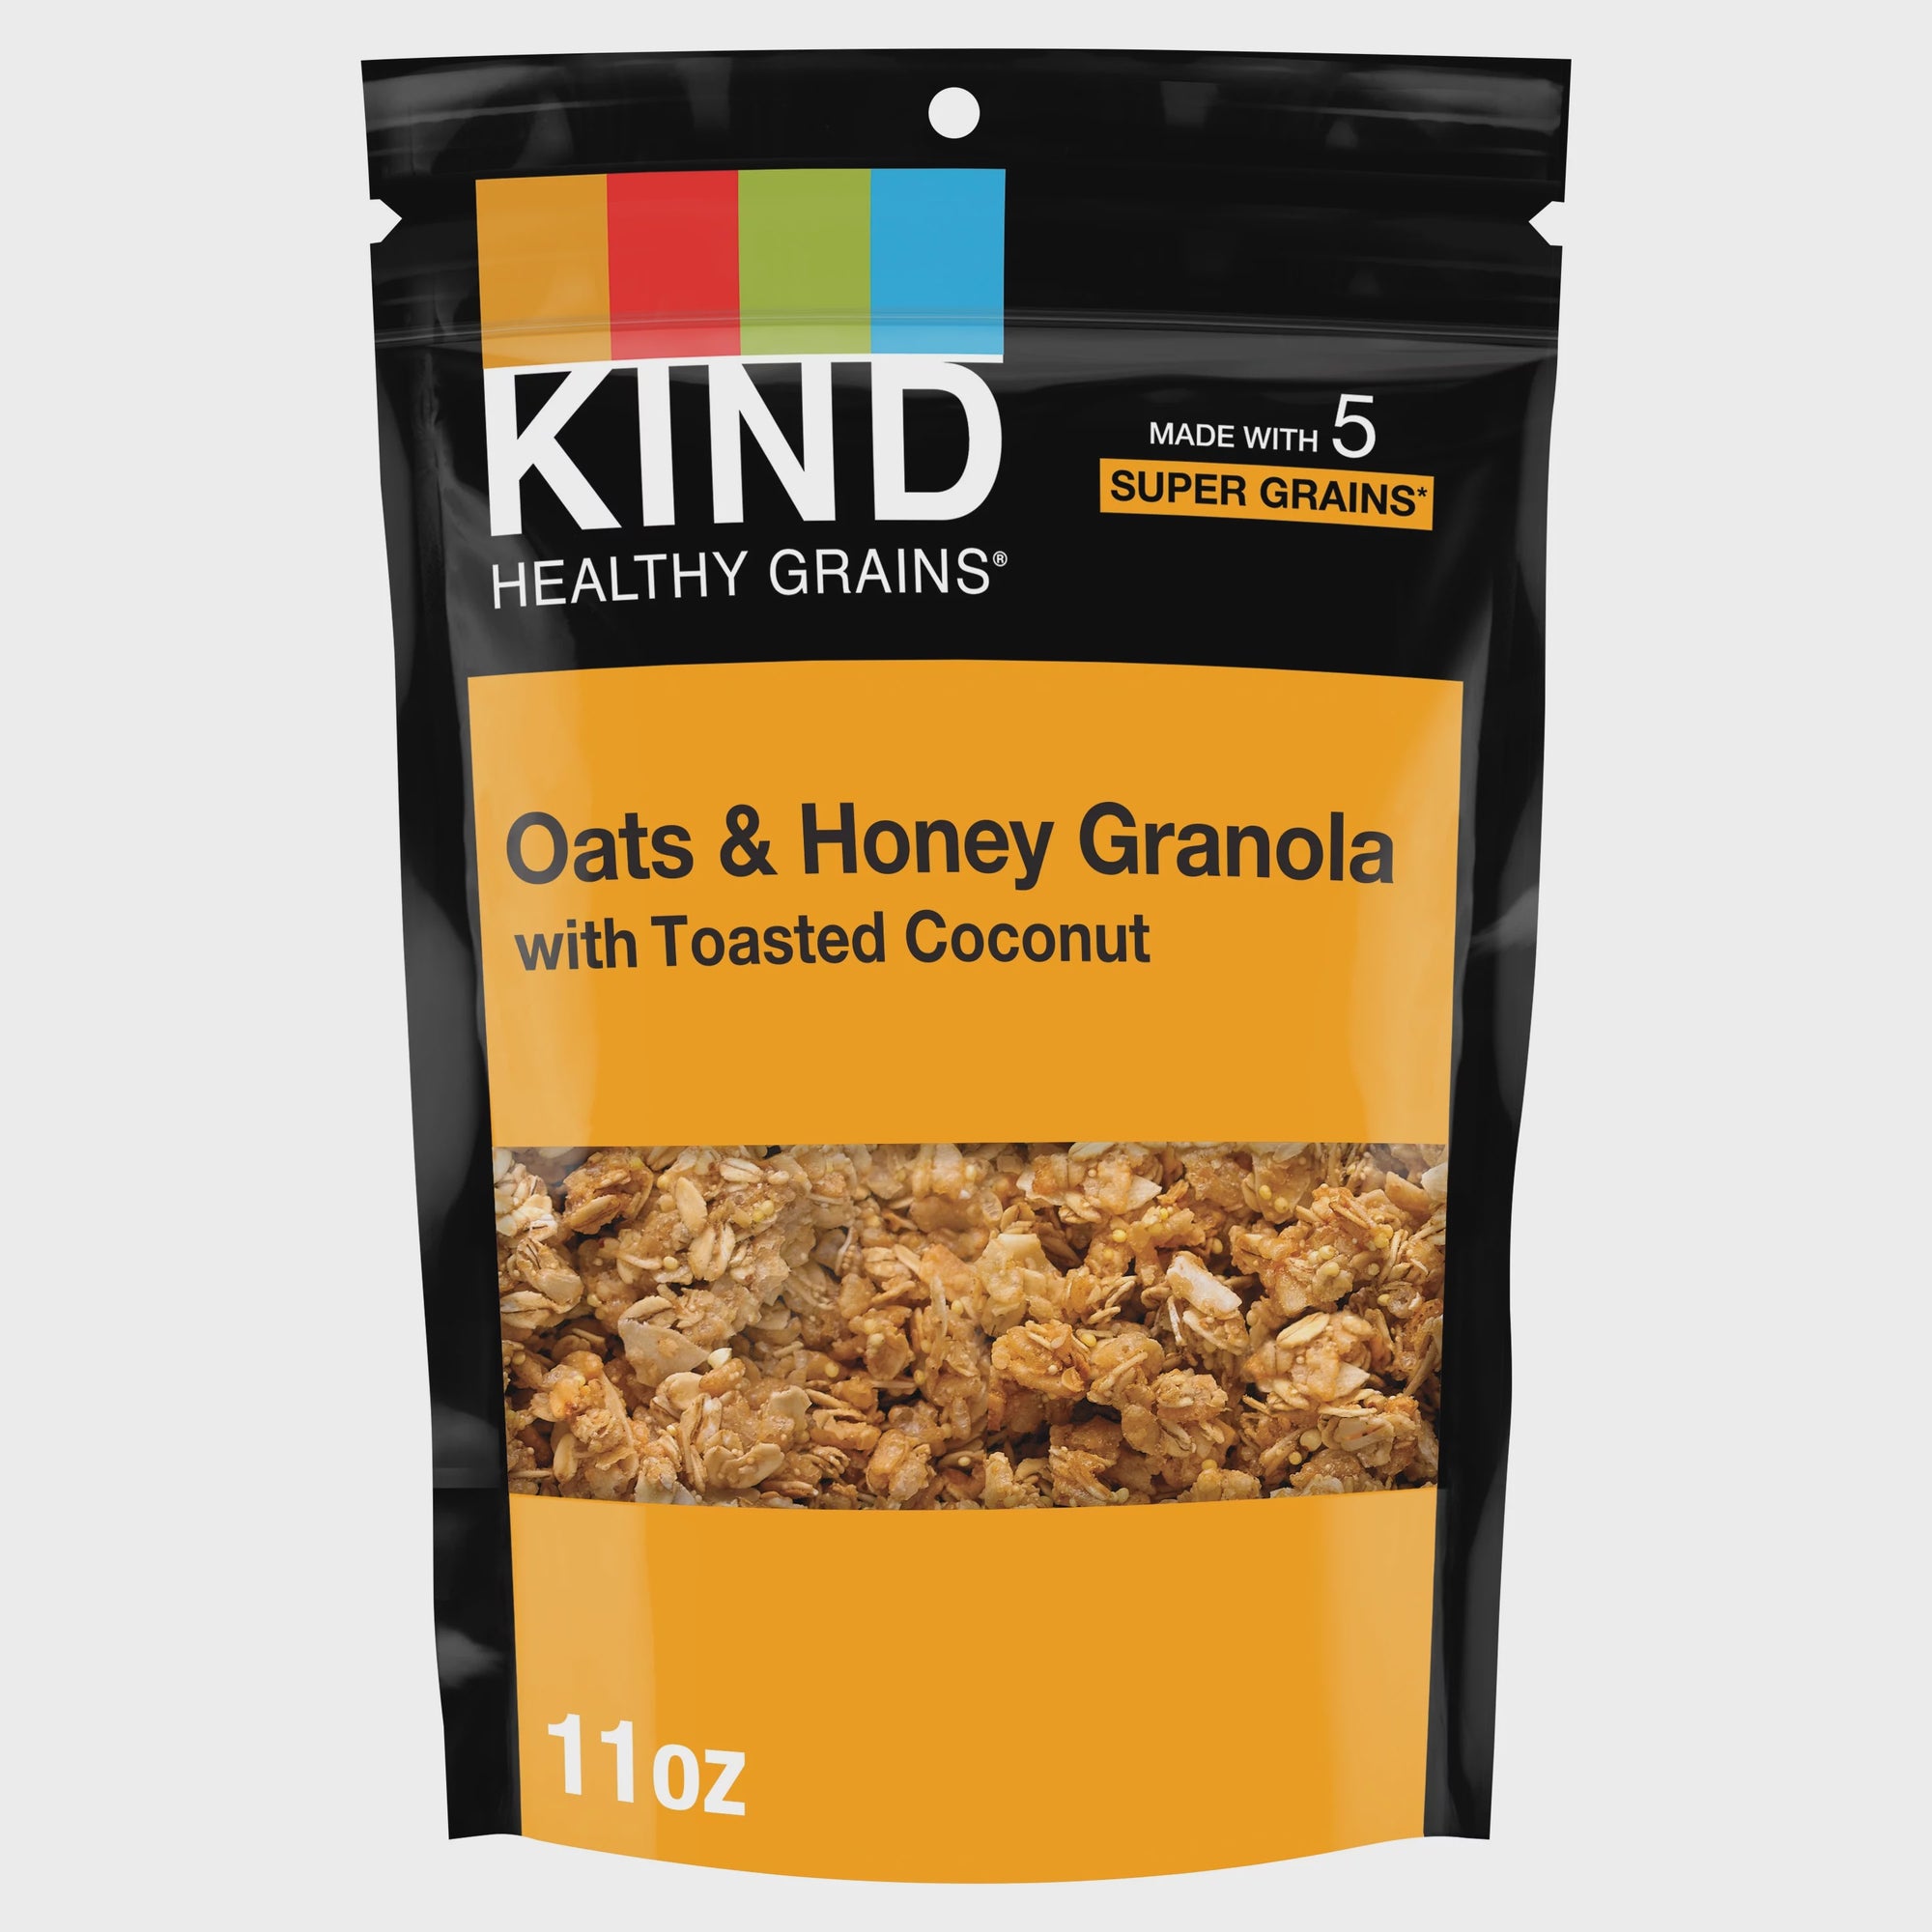 Kind Oats & Honey Granola with toasted coconut 11 oz